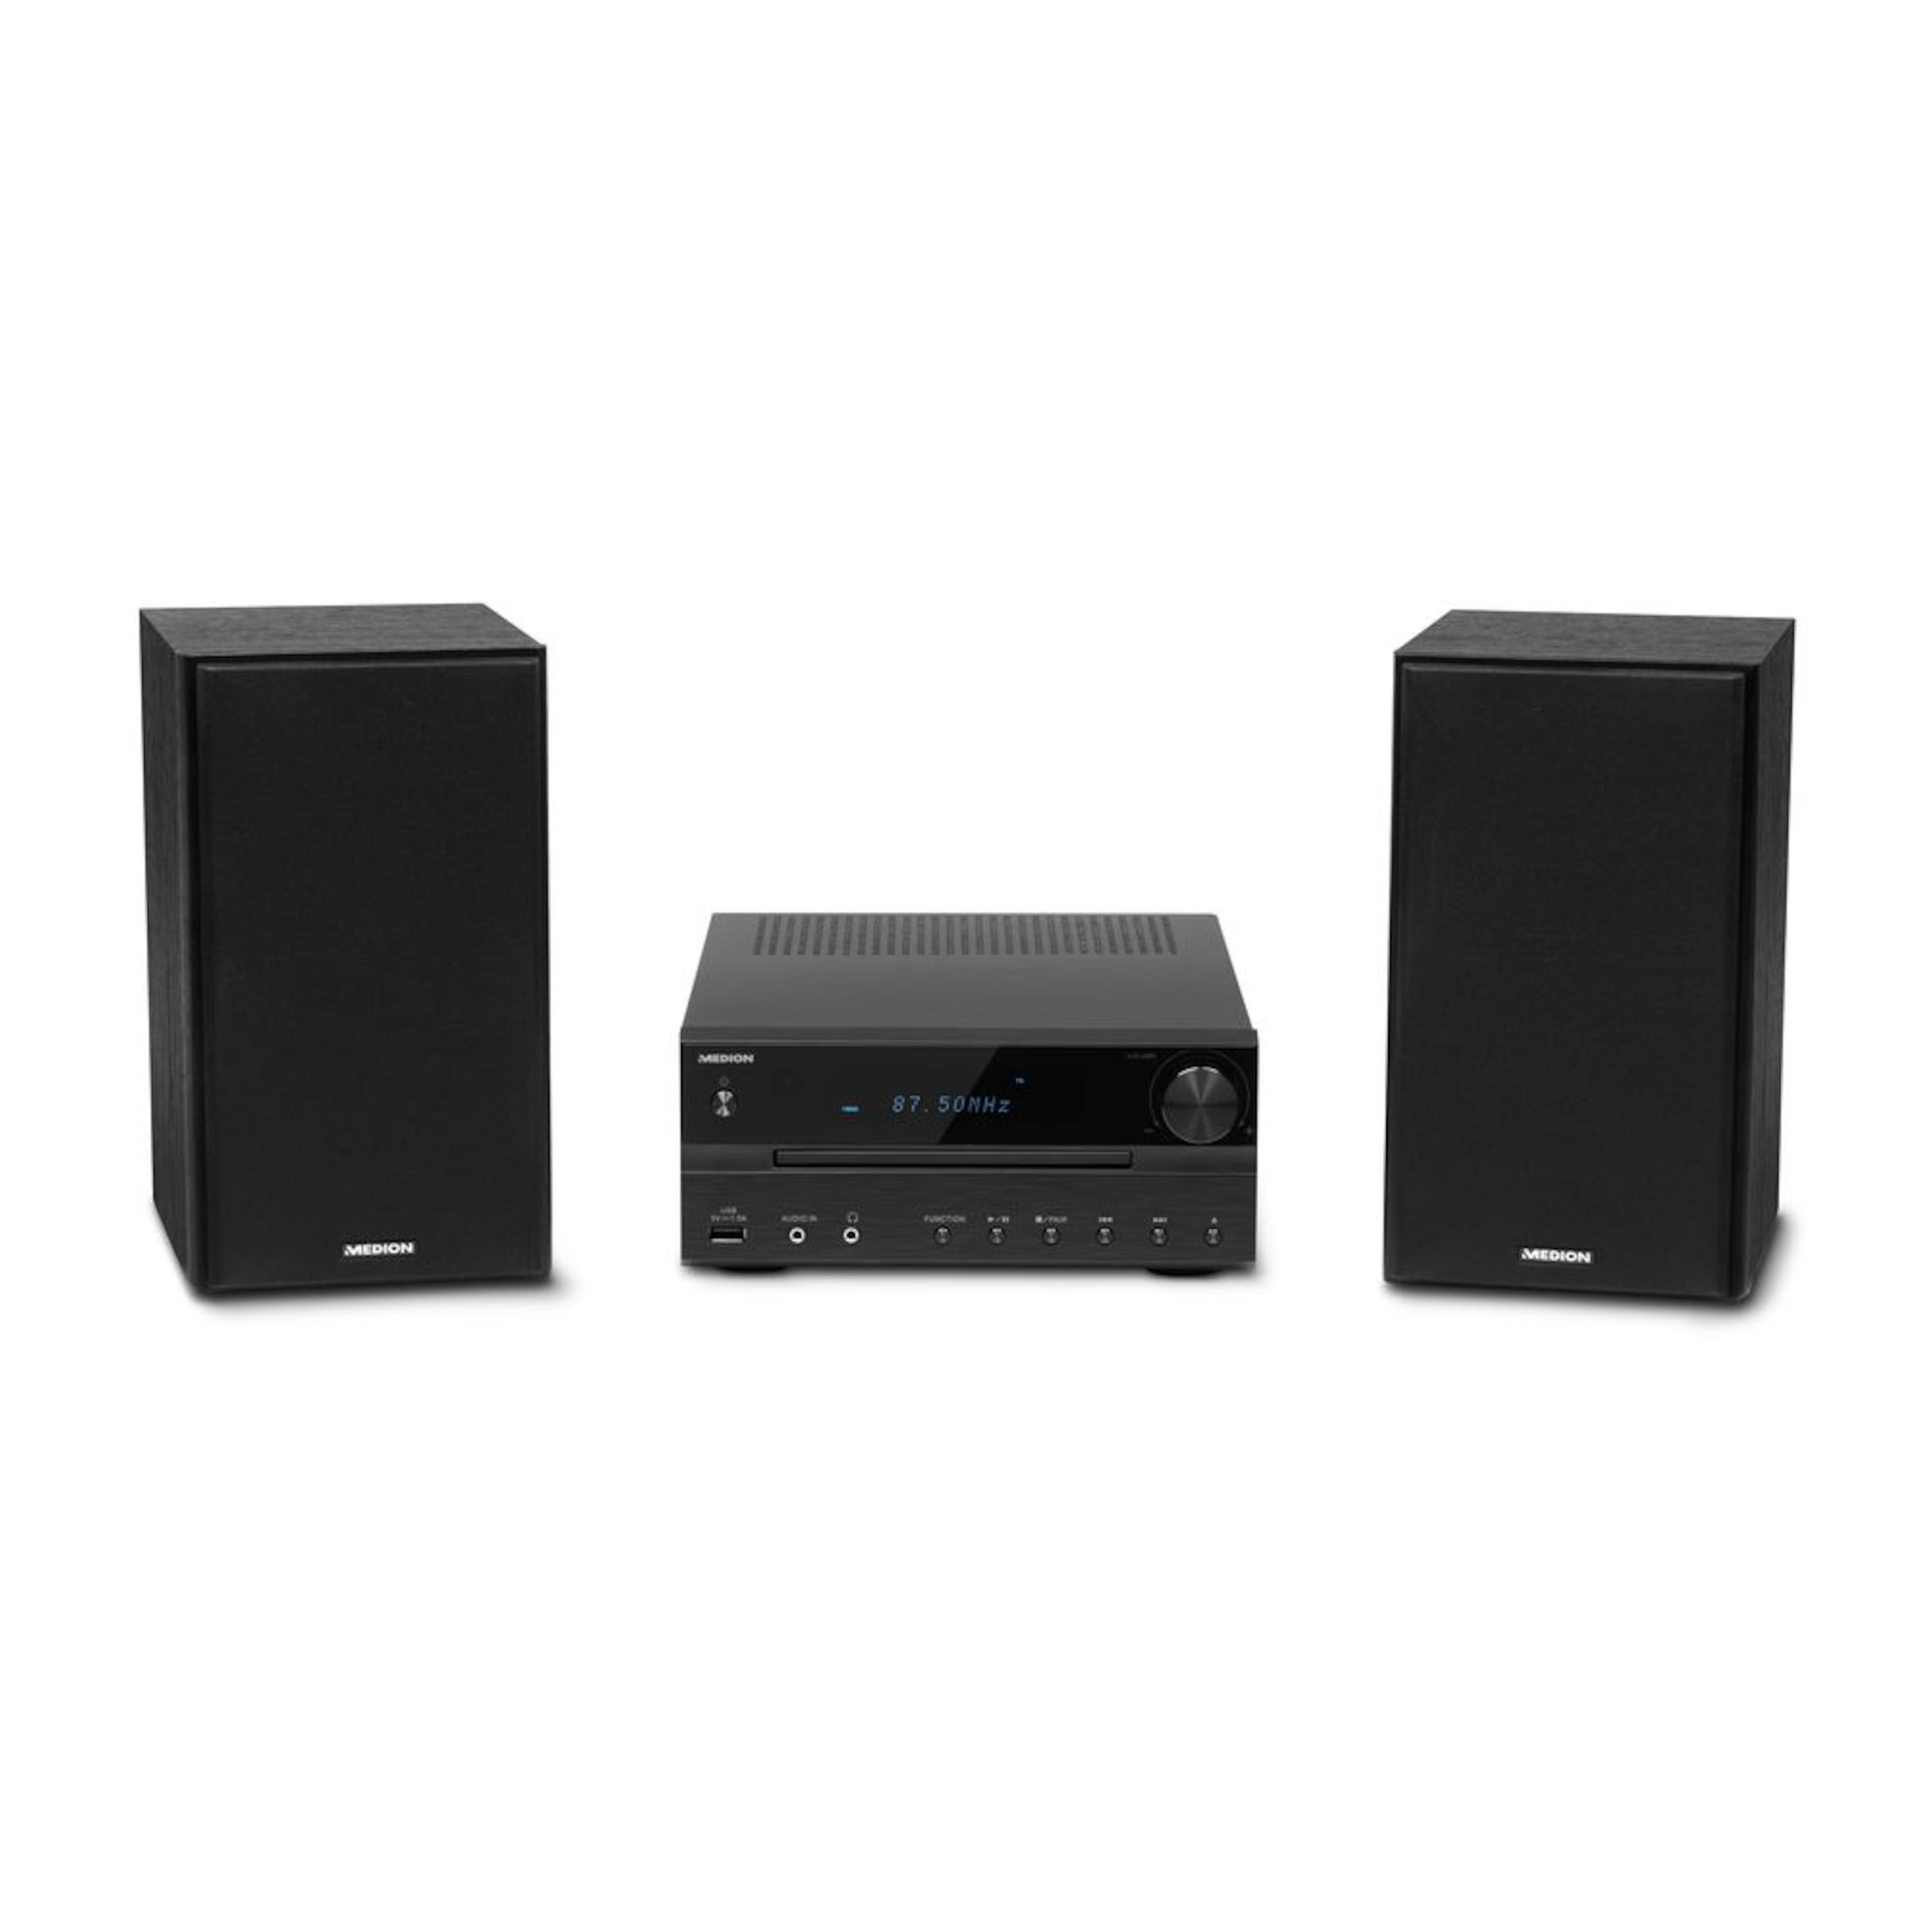 MEDION® LIFE® P64262 Micro-Audio-System mit CD-Player, DAB+, Bluetooth 3.0, USB-Anschluss & -Ladefunktion, AUX-Anschluss, PLL-UKW-Stereo-Radio, 2 x 15 W RMS  (B-Ware)